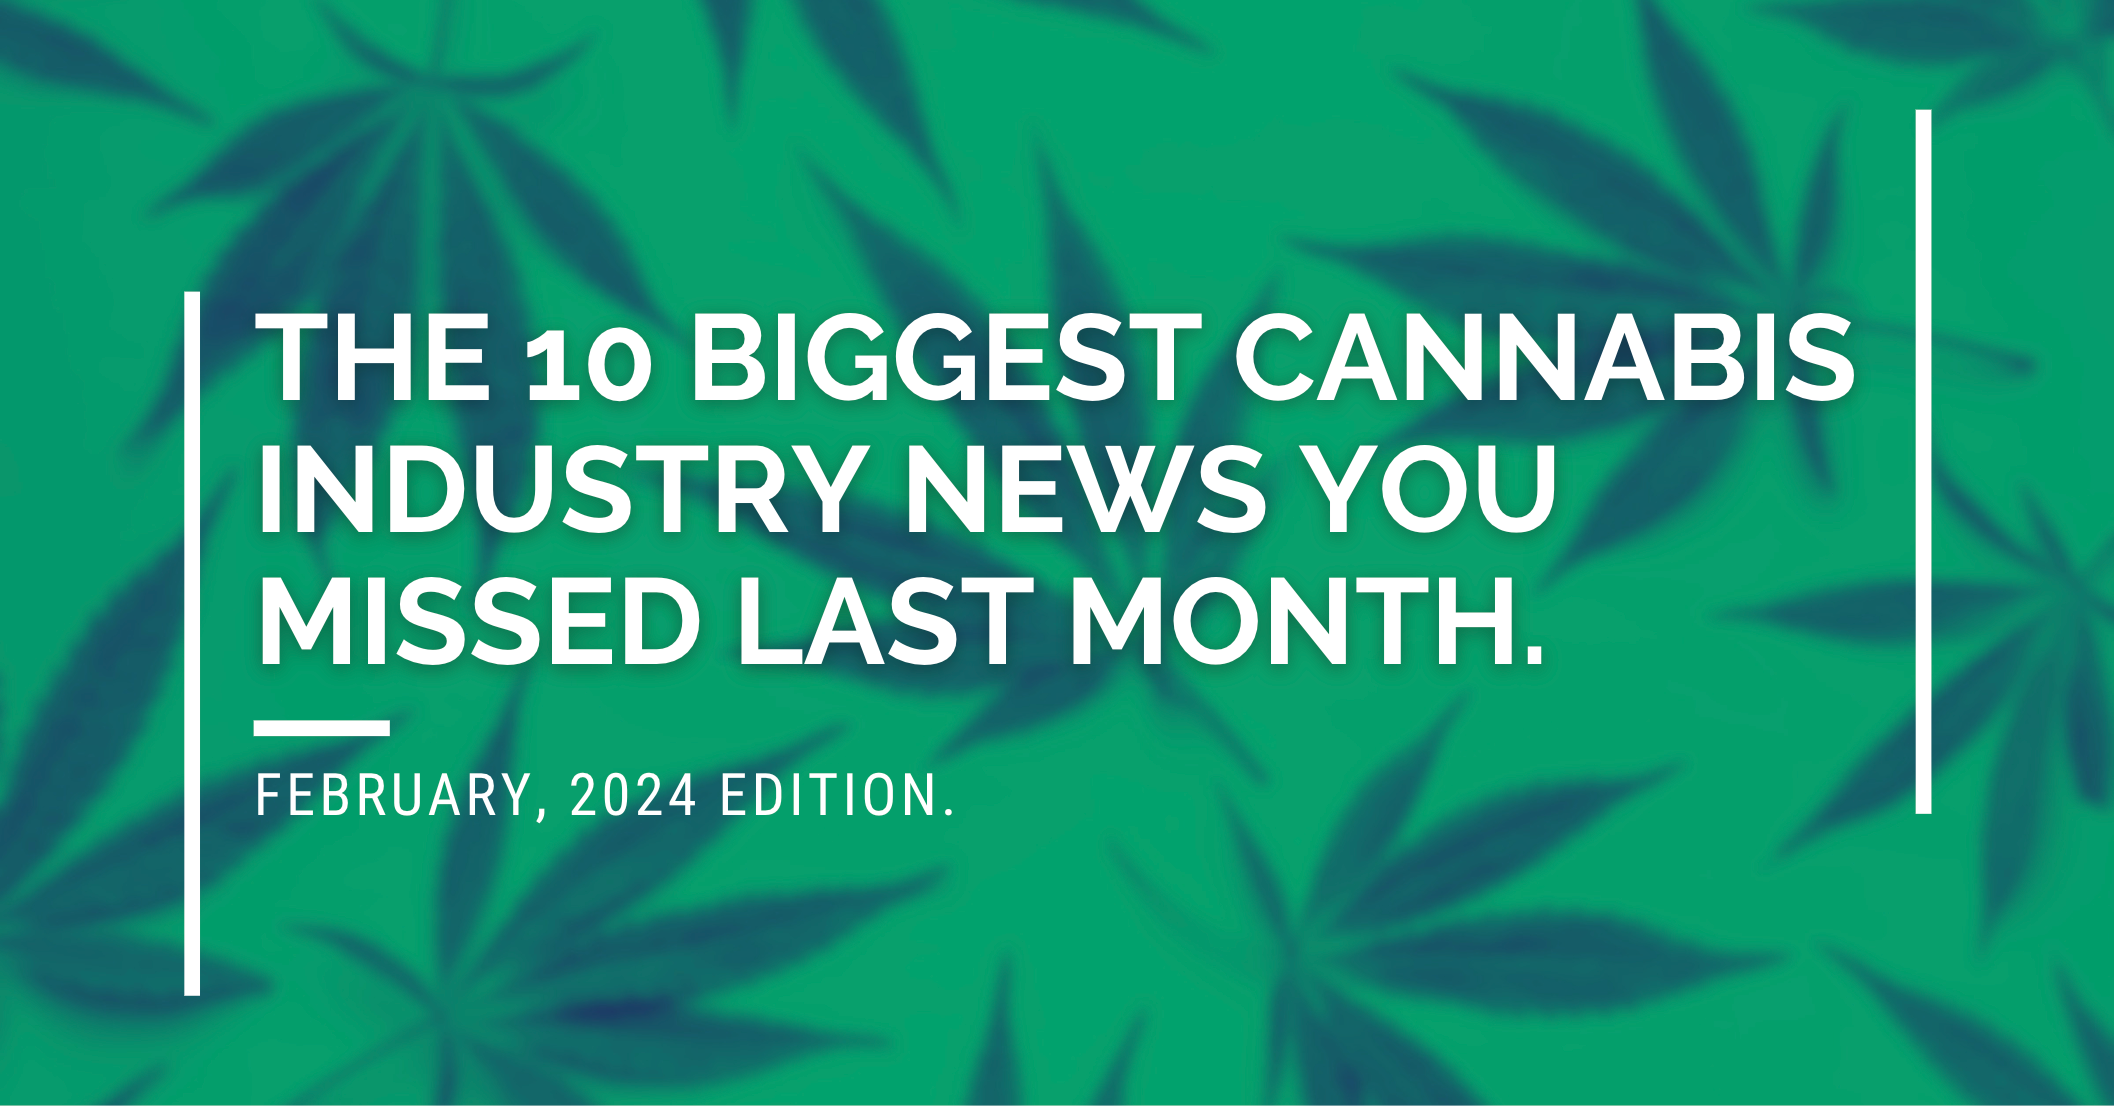 The 10 Biggest Cannabis Industry News you missed Last Month. February 2024.